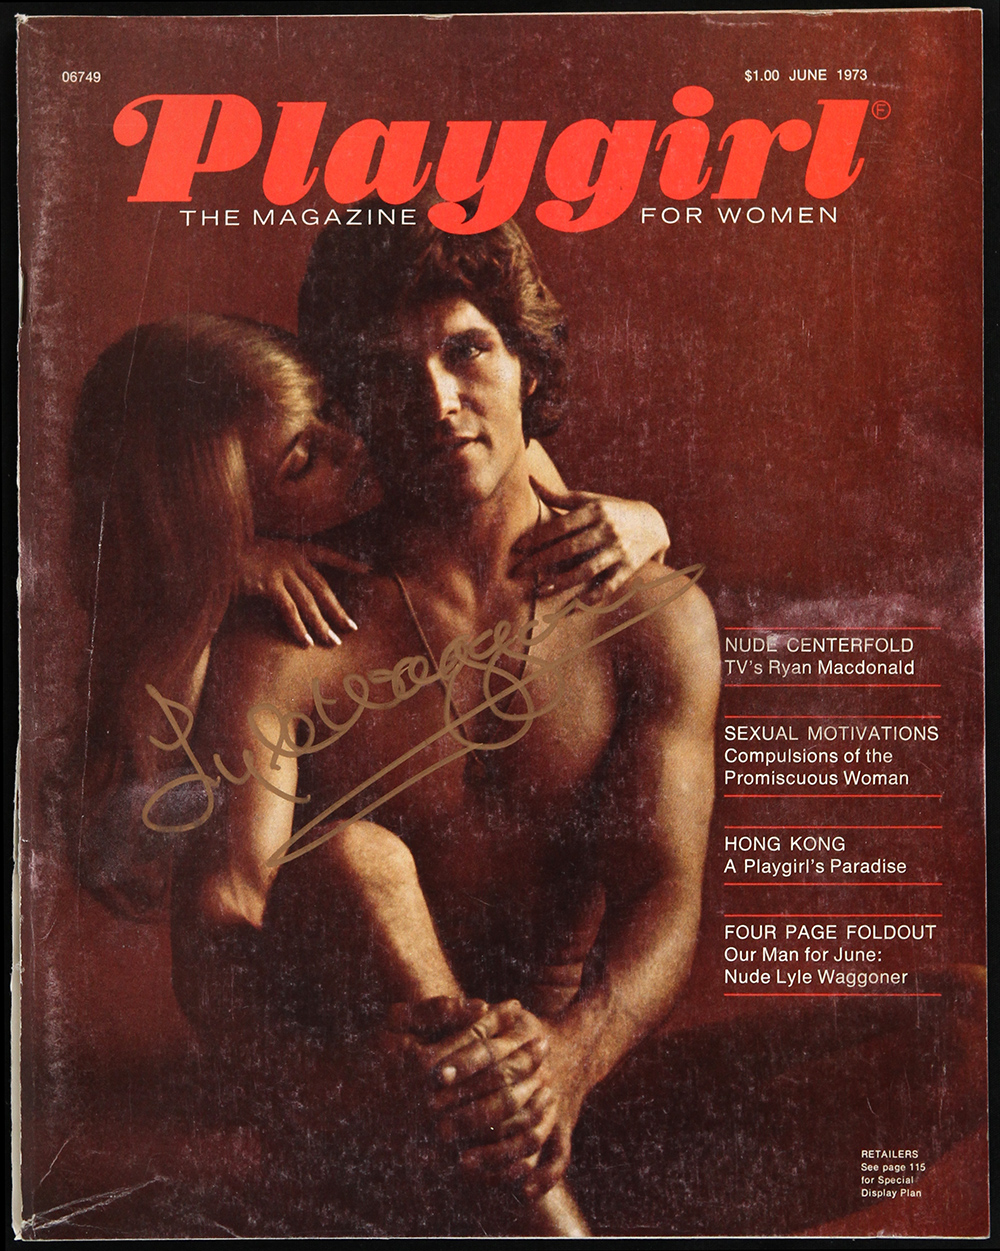 Lyle waggoner in playgirl